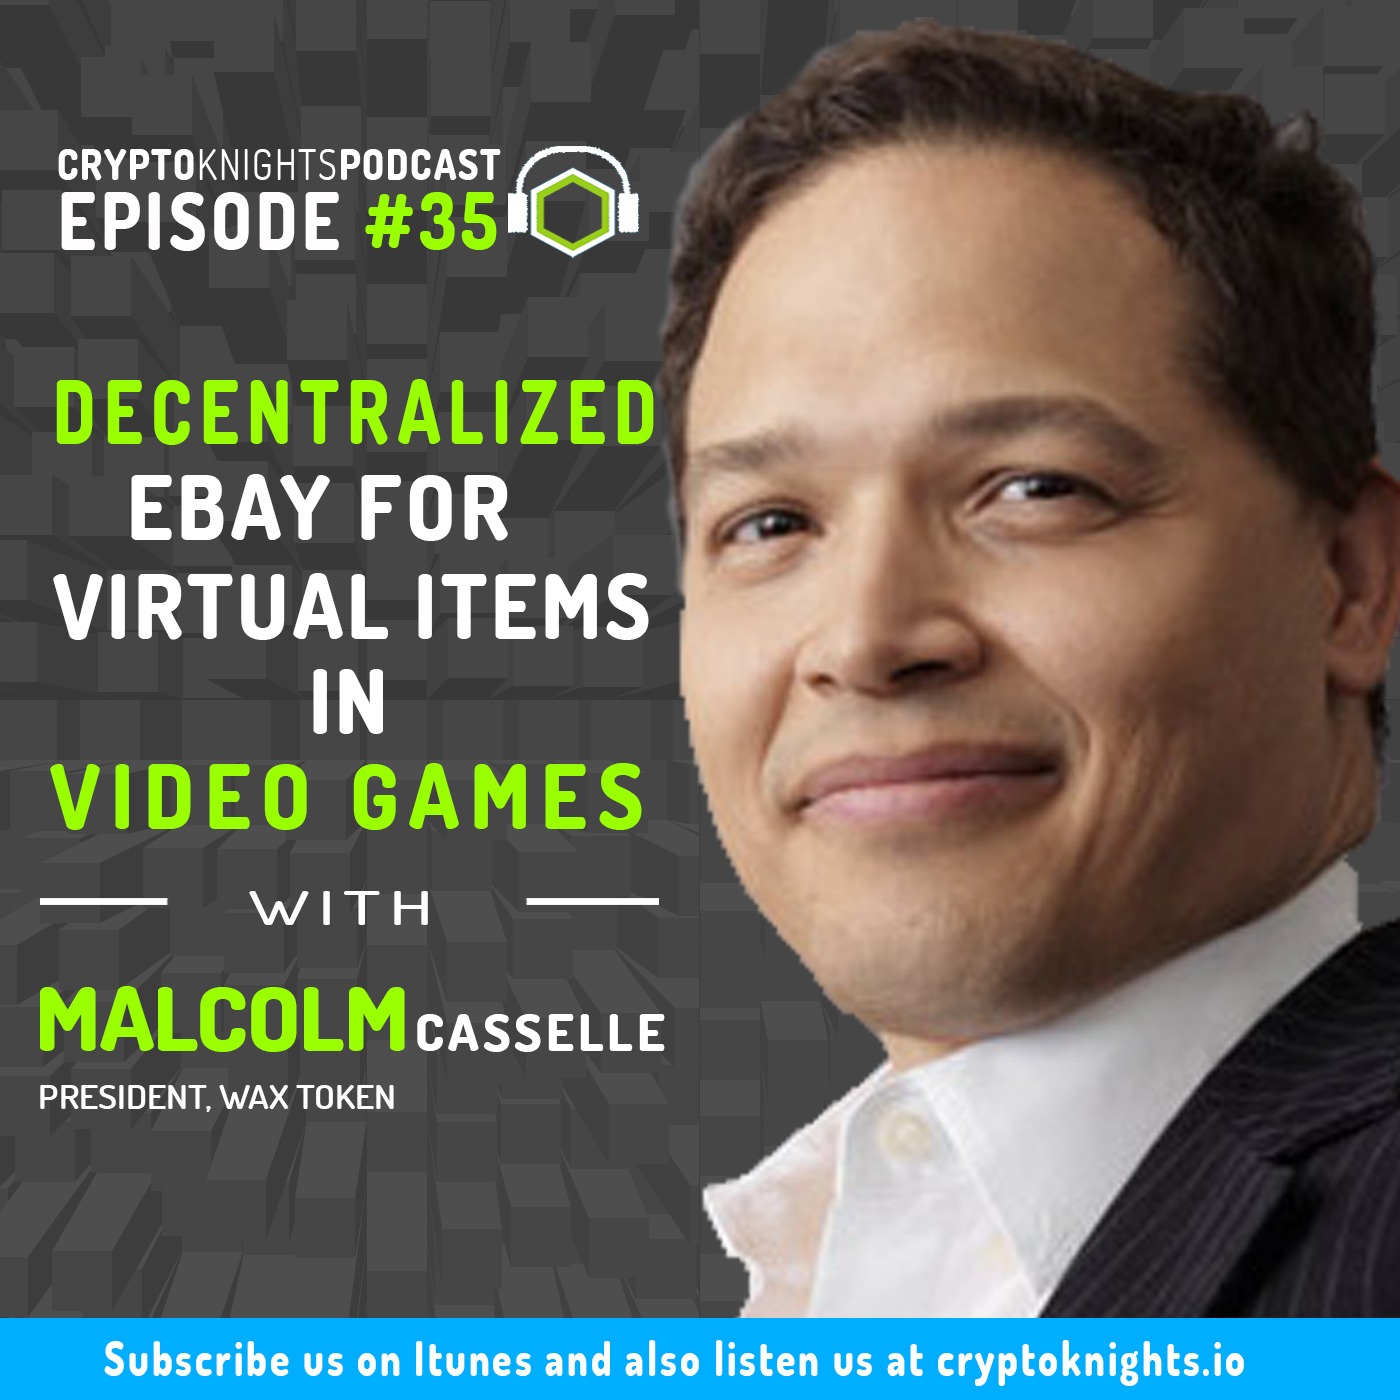 Episode 35- Decentralized eBay For Virtual Items in Video Games